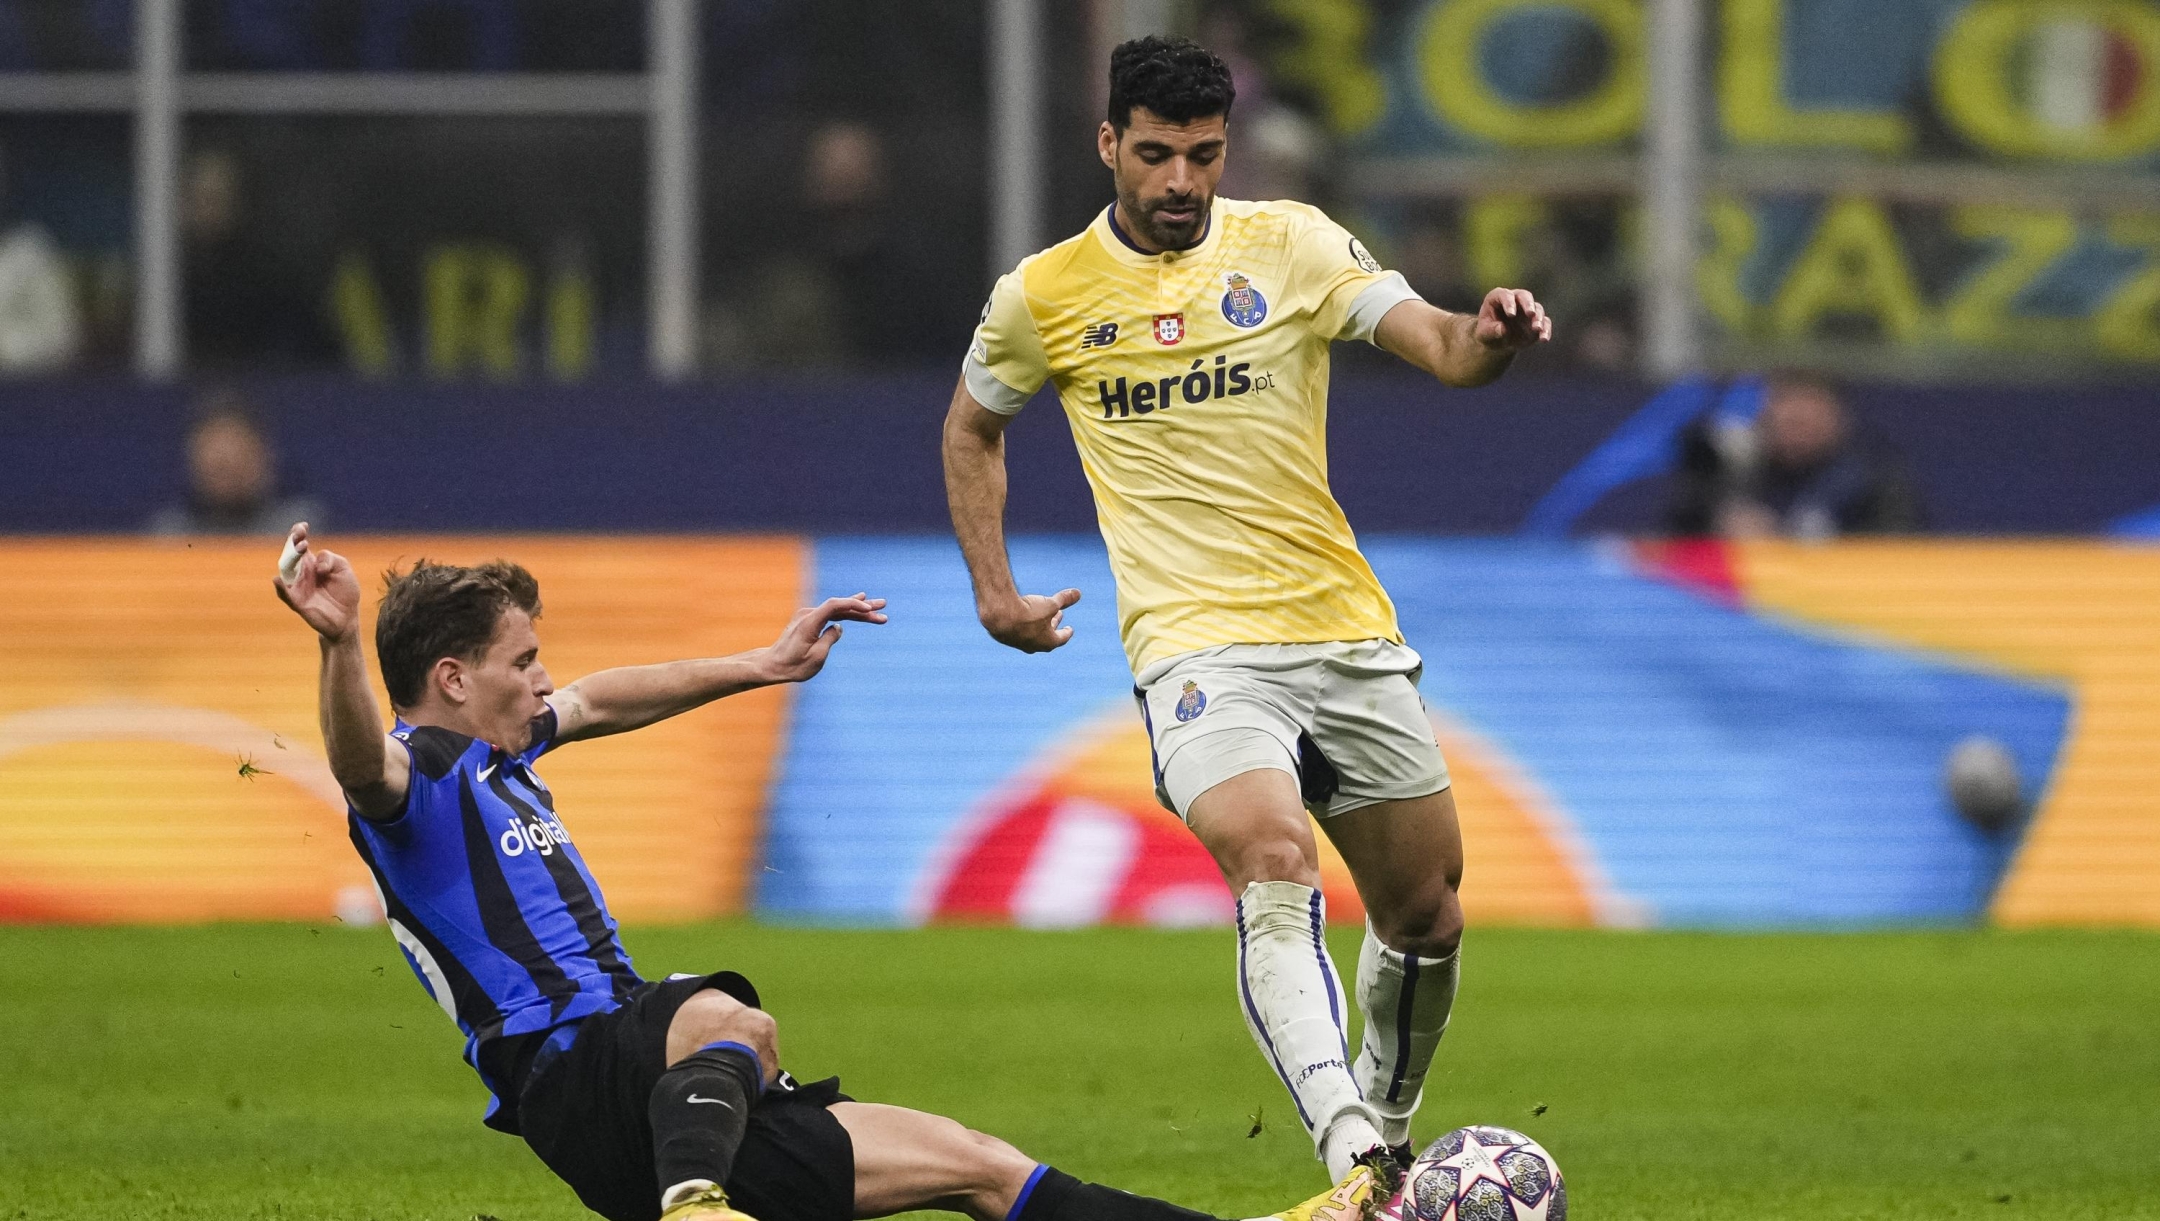 MILAN, ITALY - FEBRUARY 22: Nicolo Barella of Internazionale (L) battles for the ball with Mehdi Taremi of FC Porto (R) during the UEFA Champions League round of 16 leg one match between FC Internazionale and FC Porto at San Siro Stadium on February 22, 2023 in Milan, Italy. (Photo by Pedro Loureiro/Eurasia Sport Images/Getty Images)